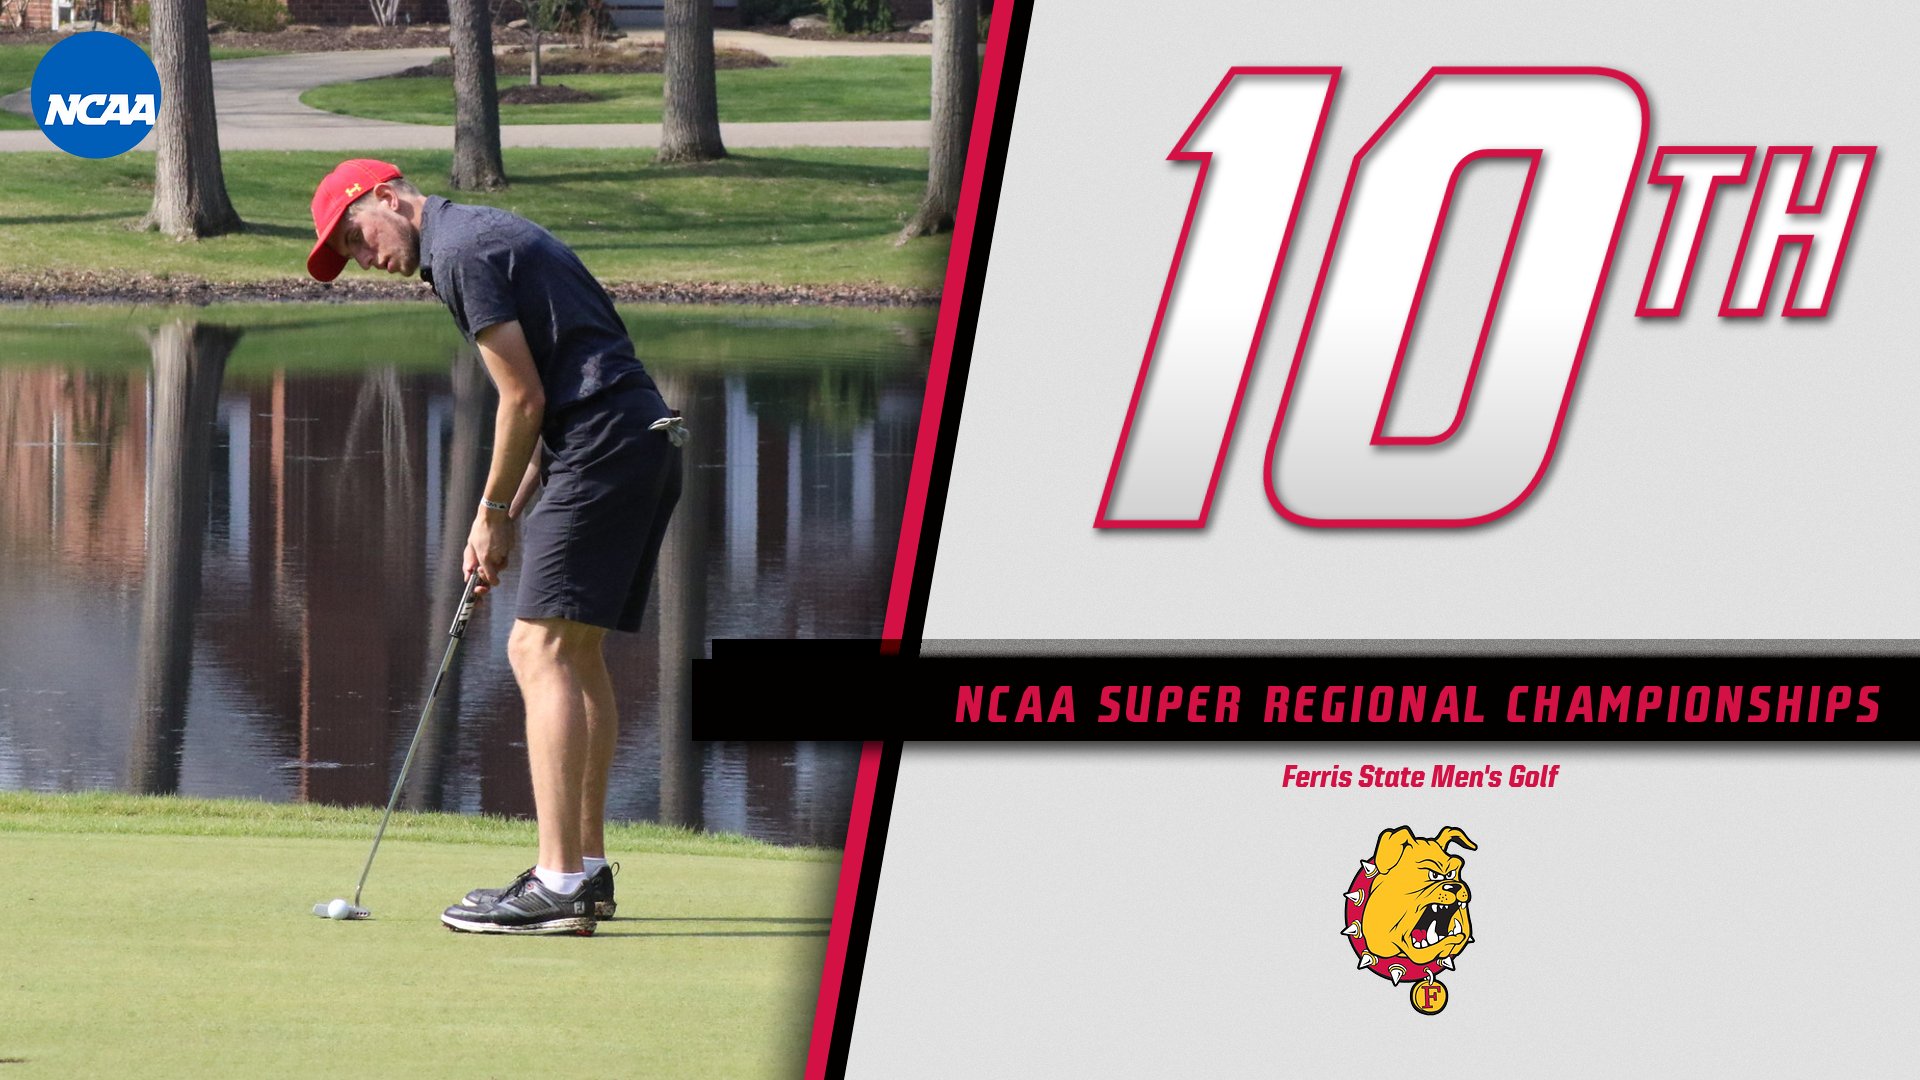 Ferris State Men's Golf Finishes 10th At NCAA Super Regional Championships